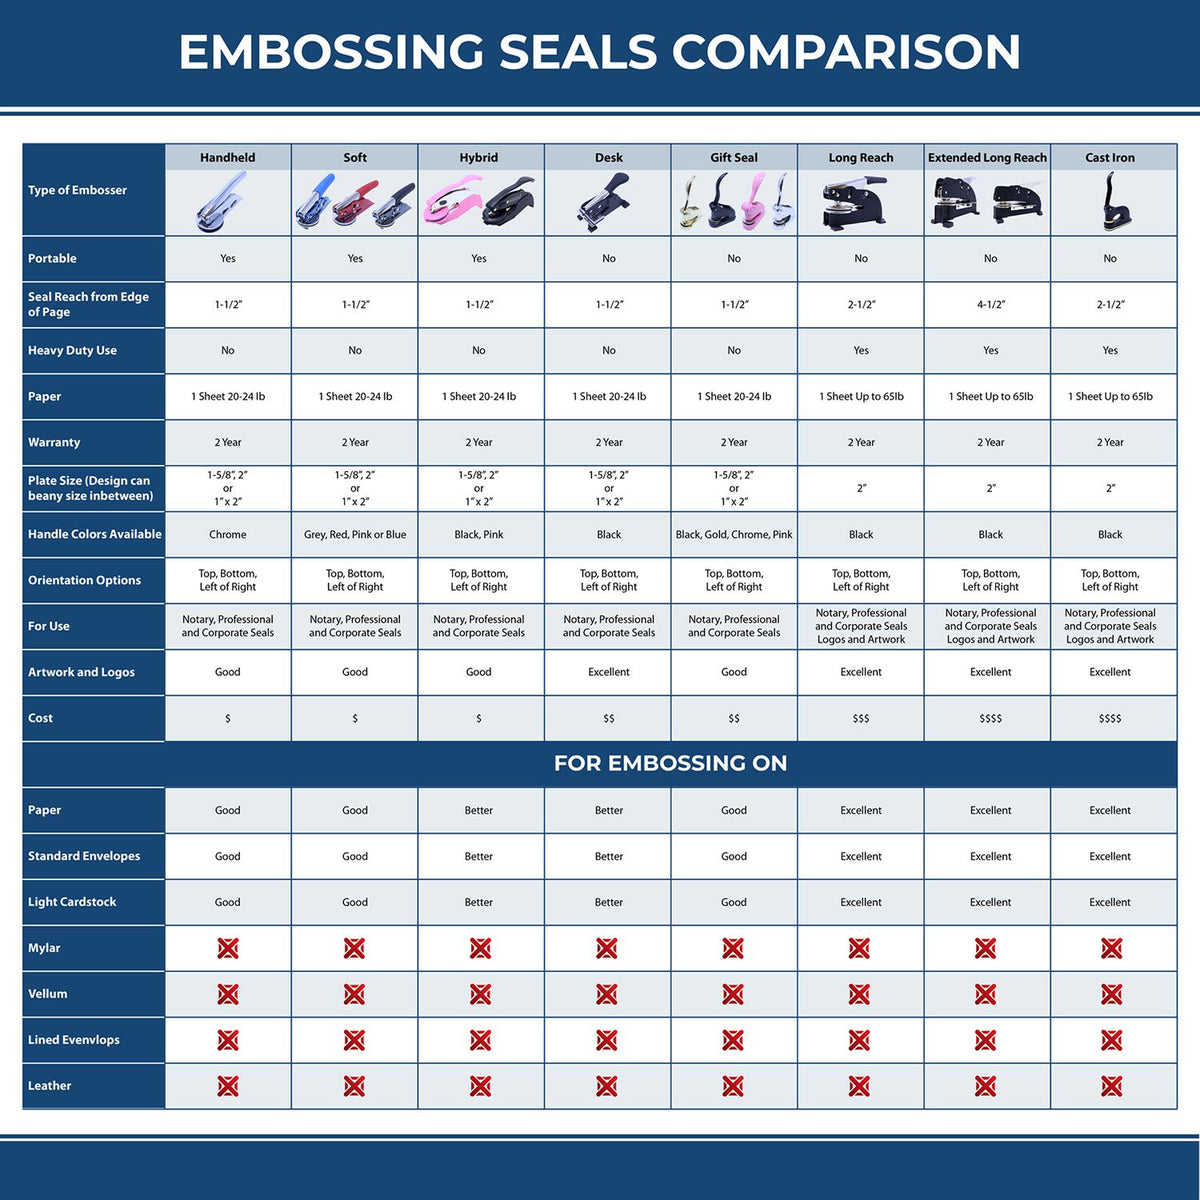 A comparison chart for the different types of mount models available for the Heavy Duty Cast Iron Maine Architect Embosser.